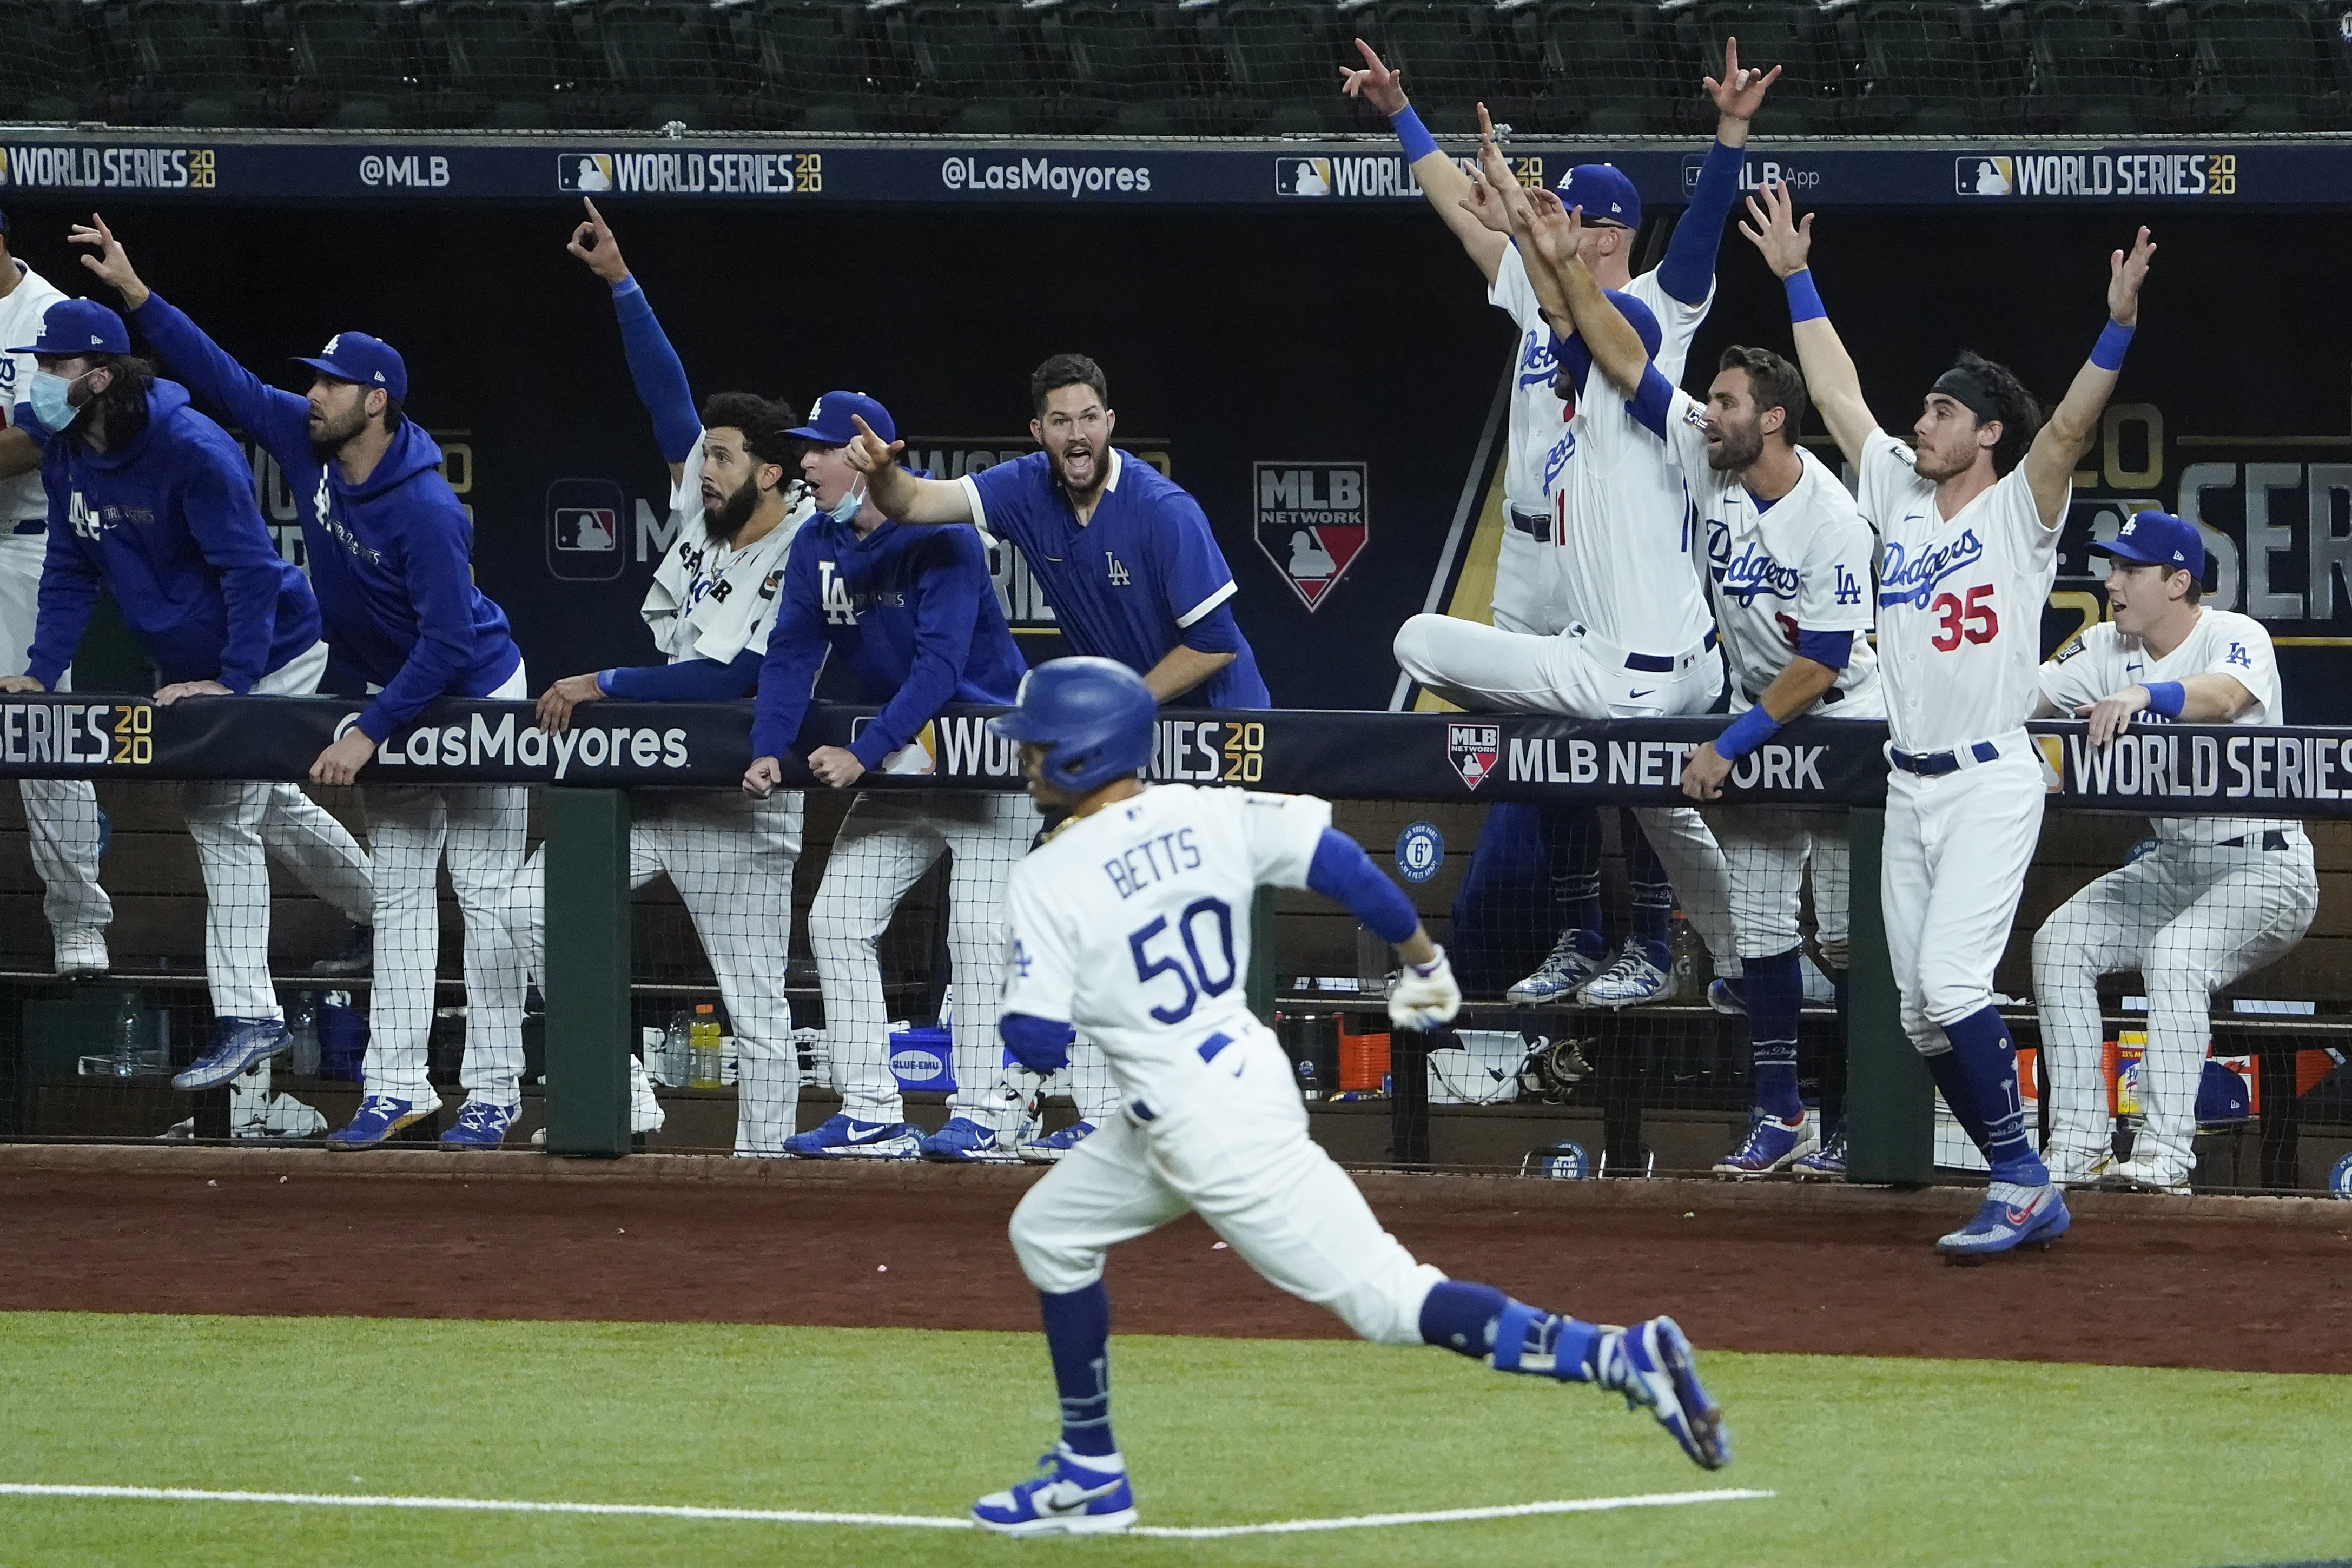 Dodgers win first World Series since 1988, beating Rays in Game 6